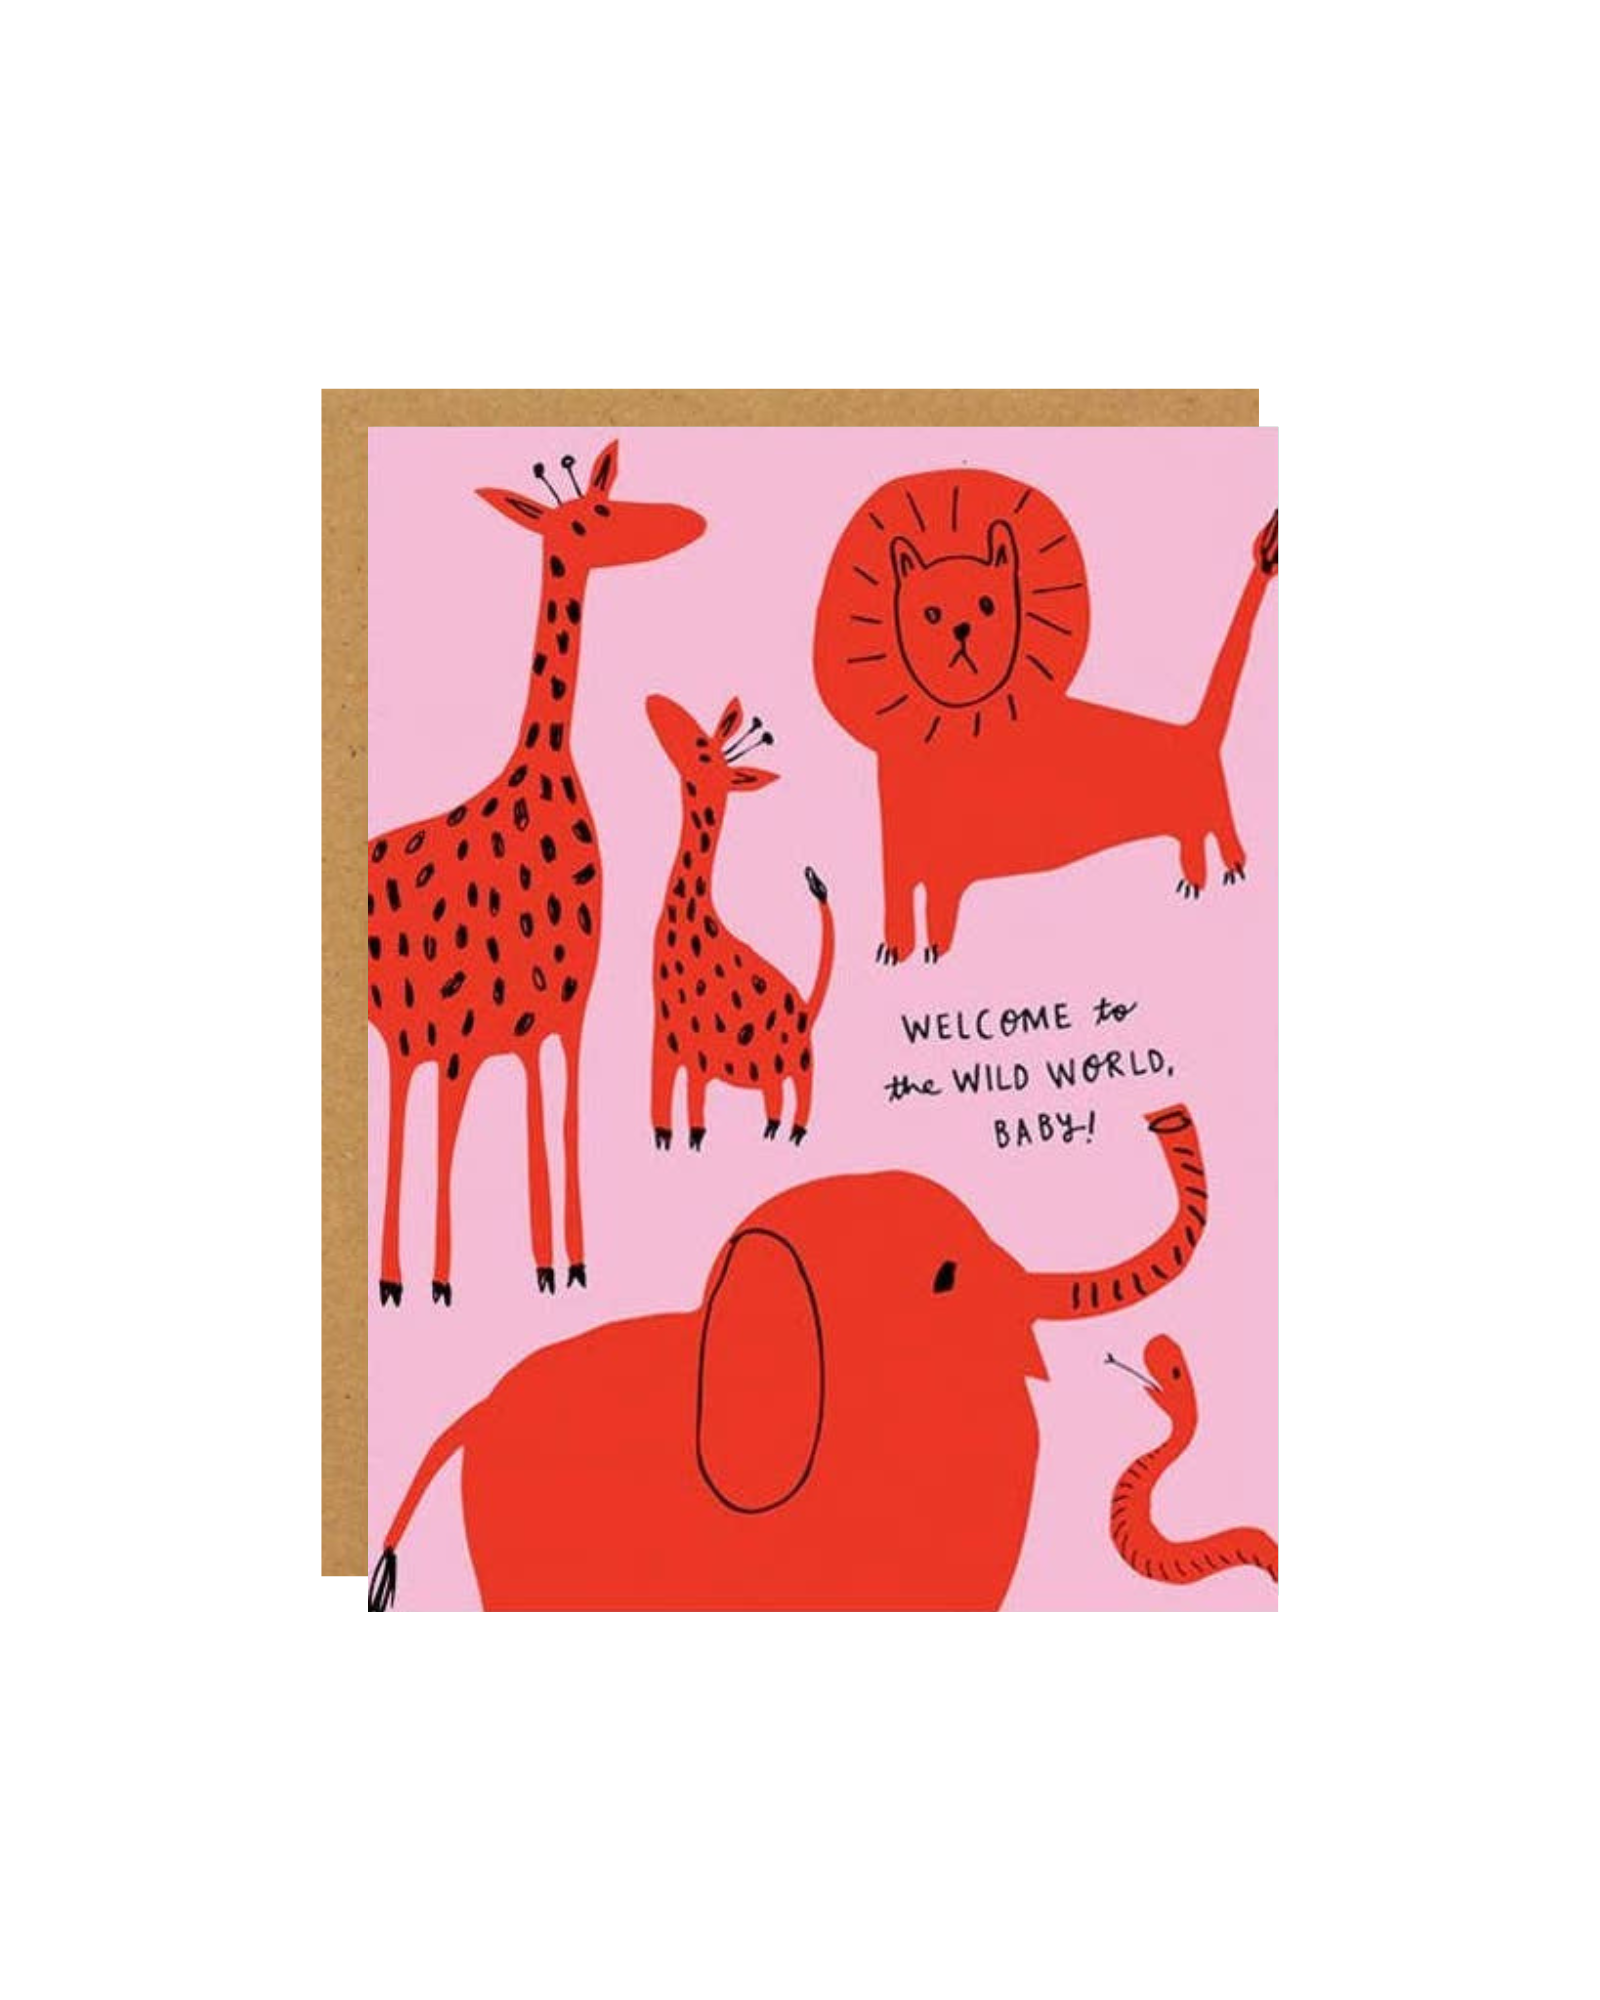 Pink greeting card with a red lion, elephant, snake, and two giraffes that reads "welcome to the wold world baby!"